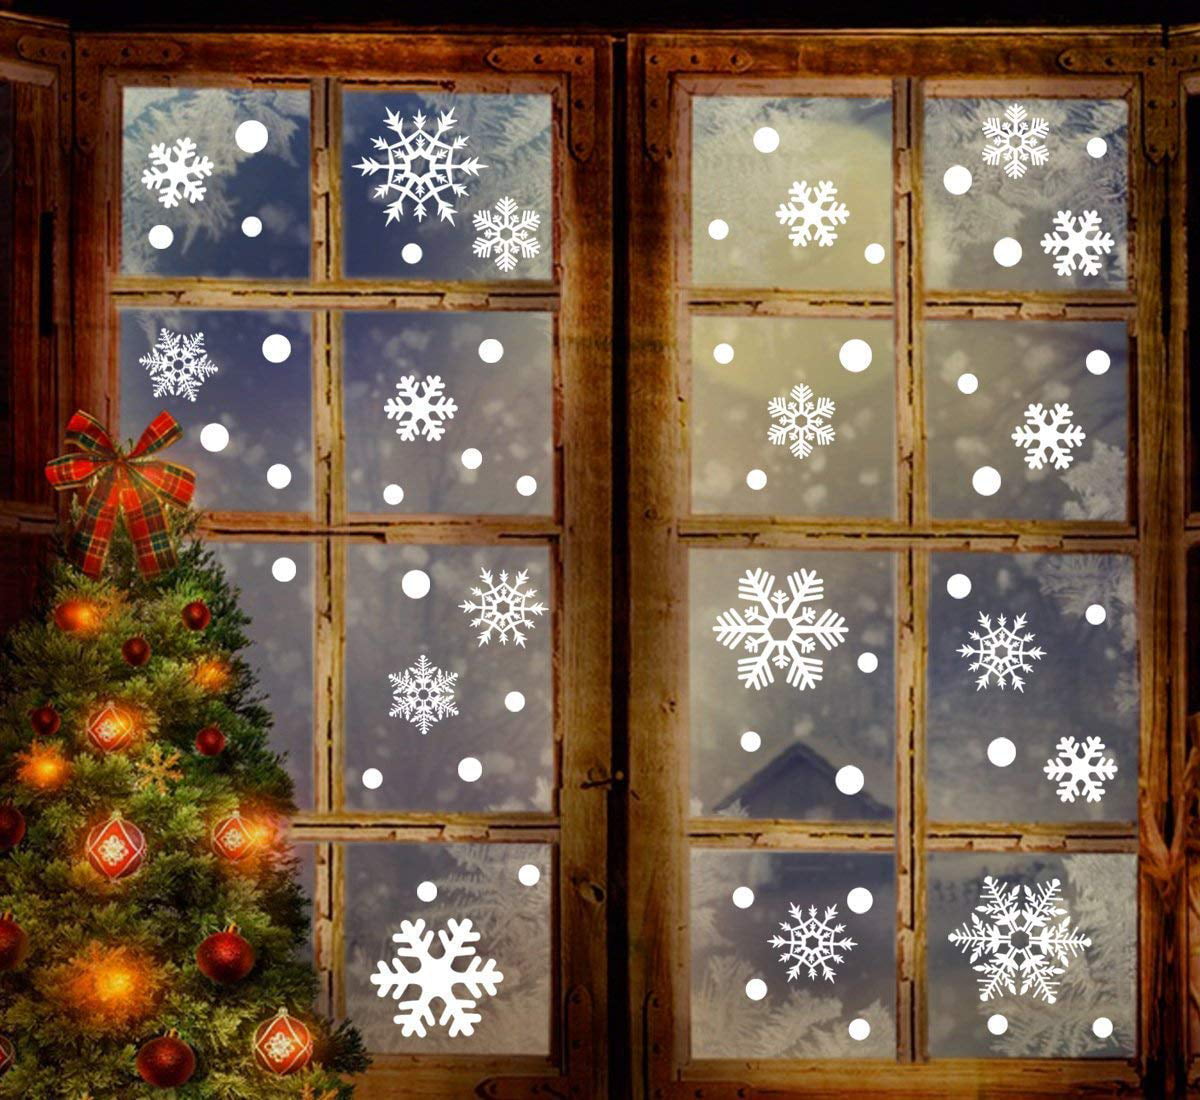 Snowflakes Christmas stickers Frozen Wall Decals Window stickers kids Gift Party